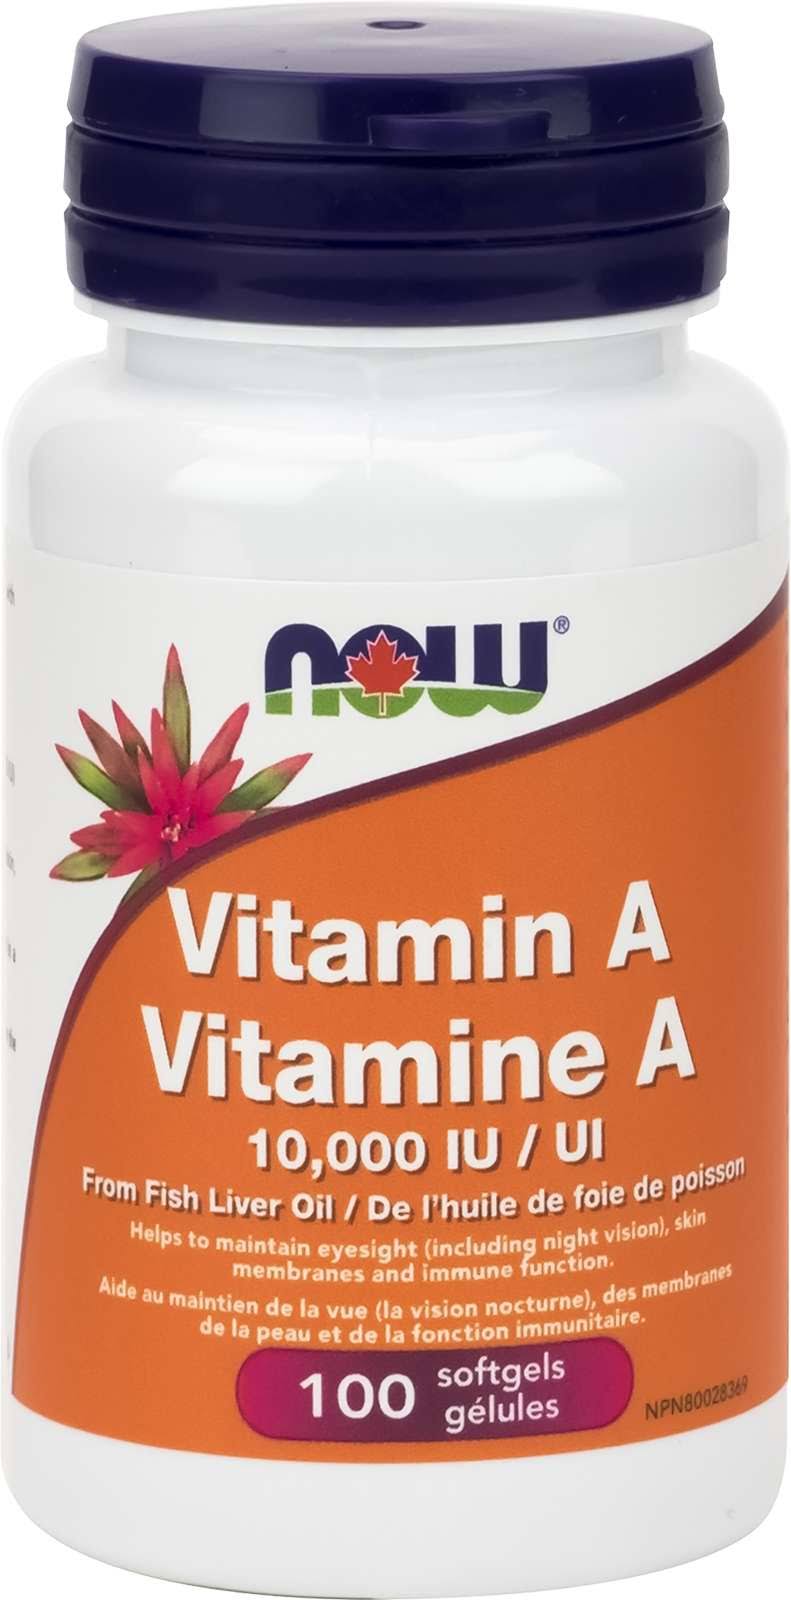 Now Vitamin a 10,000 IU Dietary Supplement - 100ct